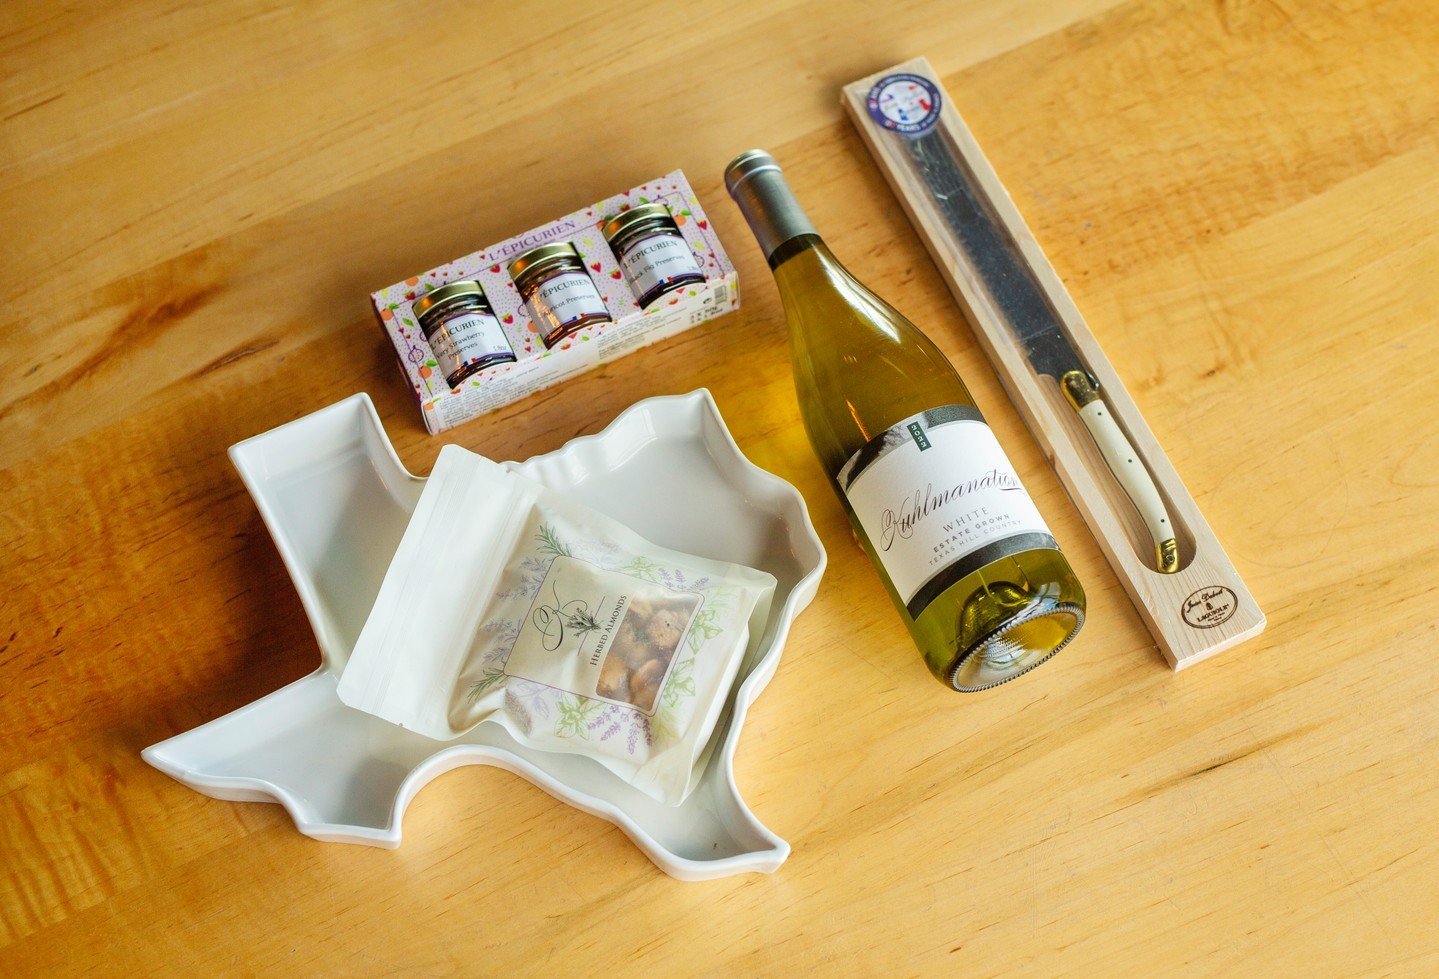 Come celebrate Mother's Day with us! Our Mother's Day Bundle includes a Texas platter, bread knife, jam set, 6oz bag of Herbed Almonds, and a bottle of our 2022 Estate White for $100. Plus, on Sunday, Moms get 50% off glasses of wines from a select m